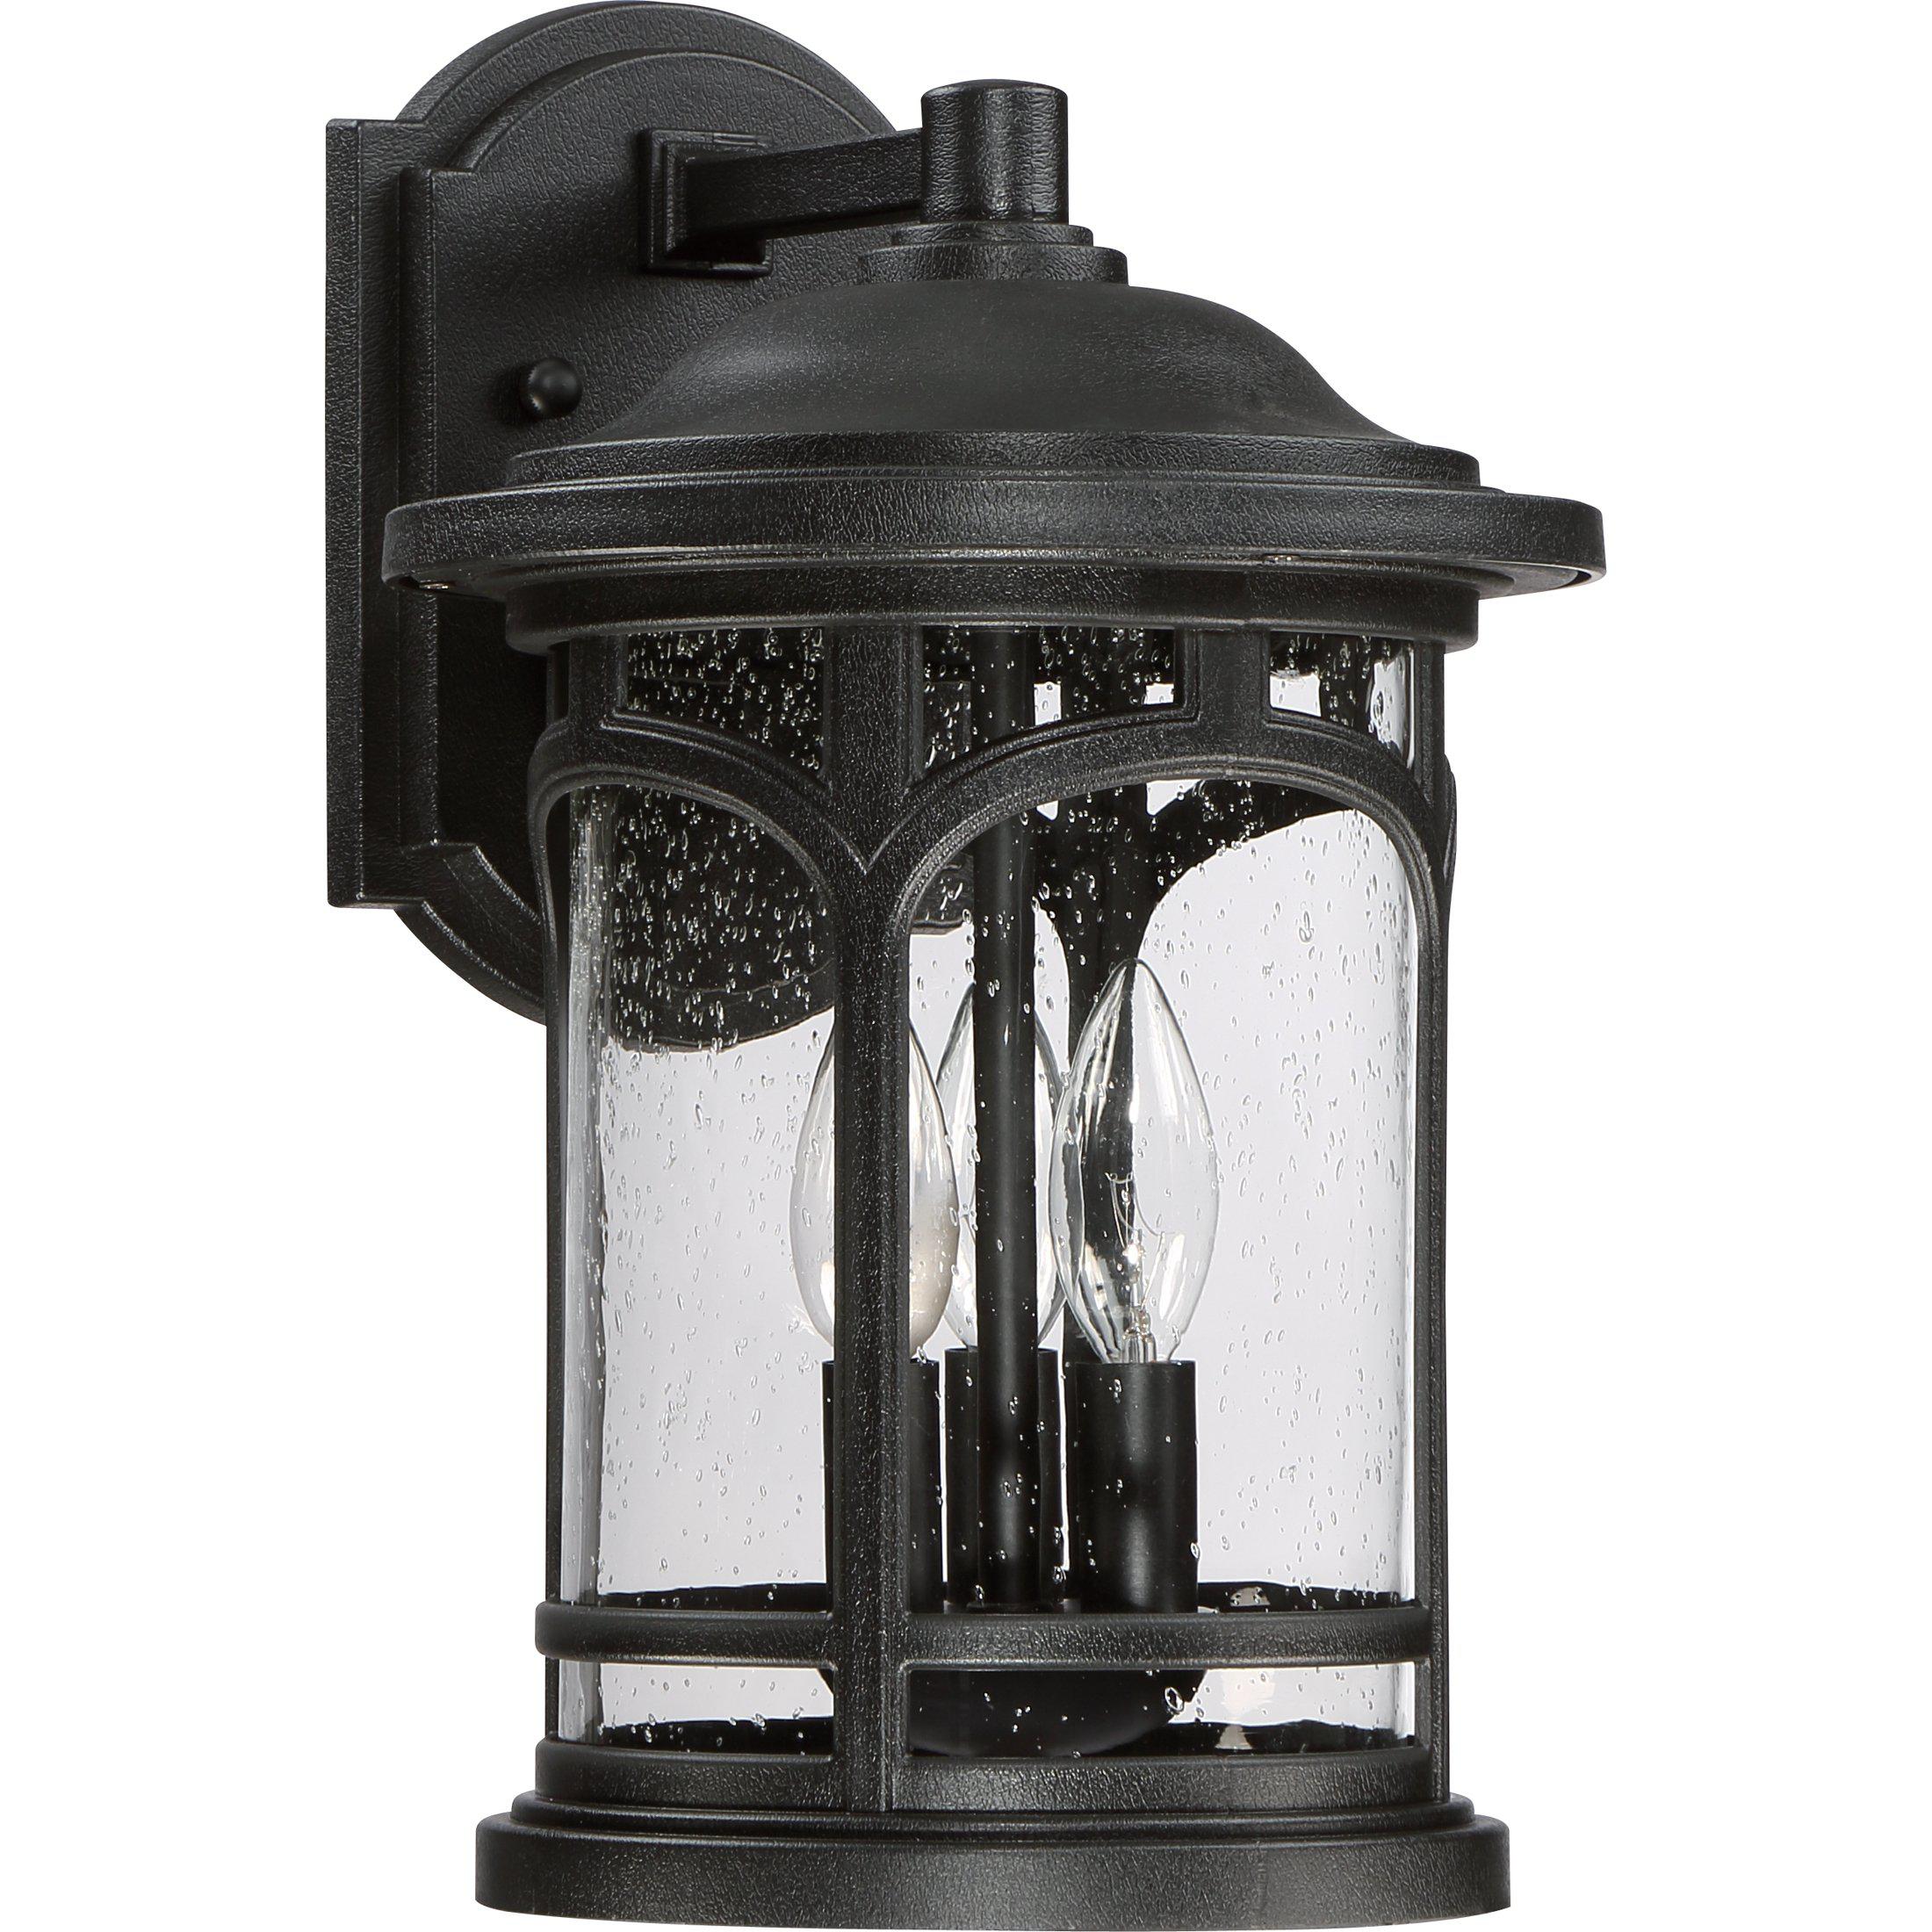 Quoizel  Marblehead Outdoor Lantern, Small 3 Light Outdoor l Wall Quoizel   